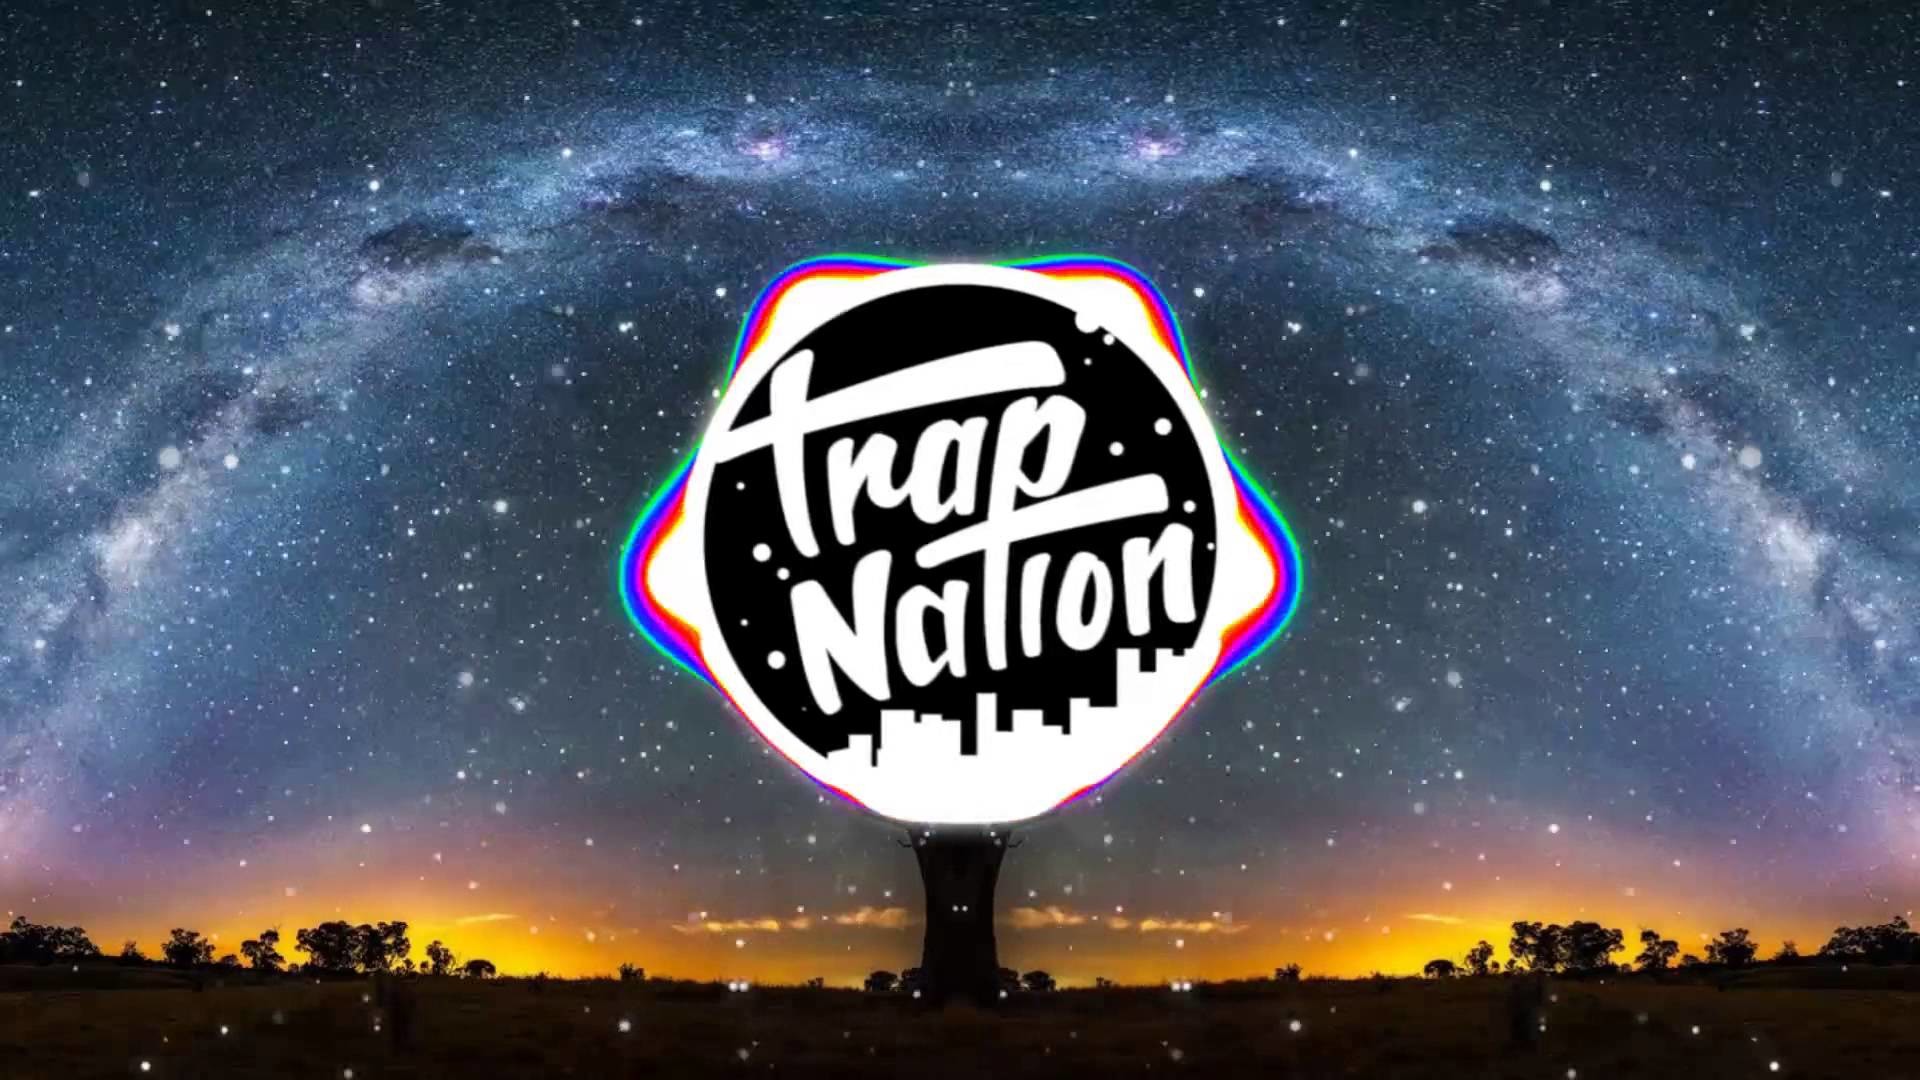 trap nation wallpaper hd,font,sky,text,graphic design,space